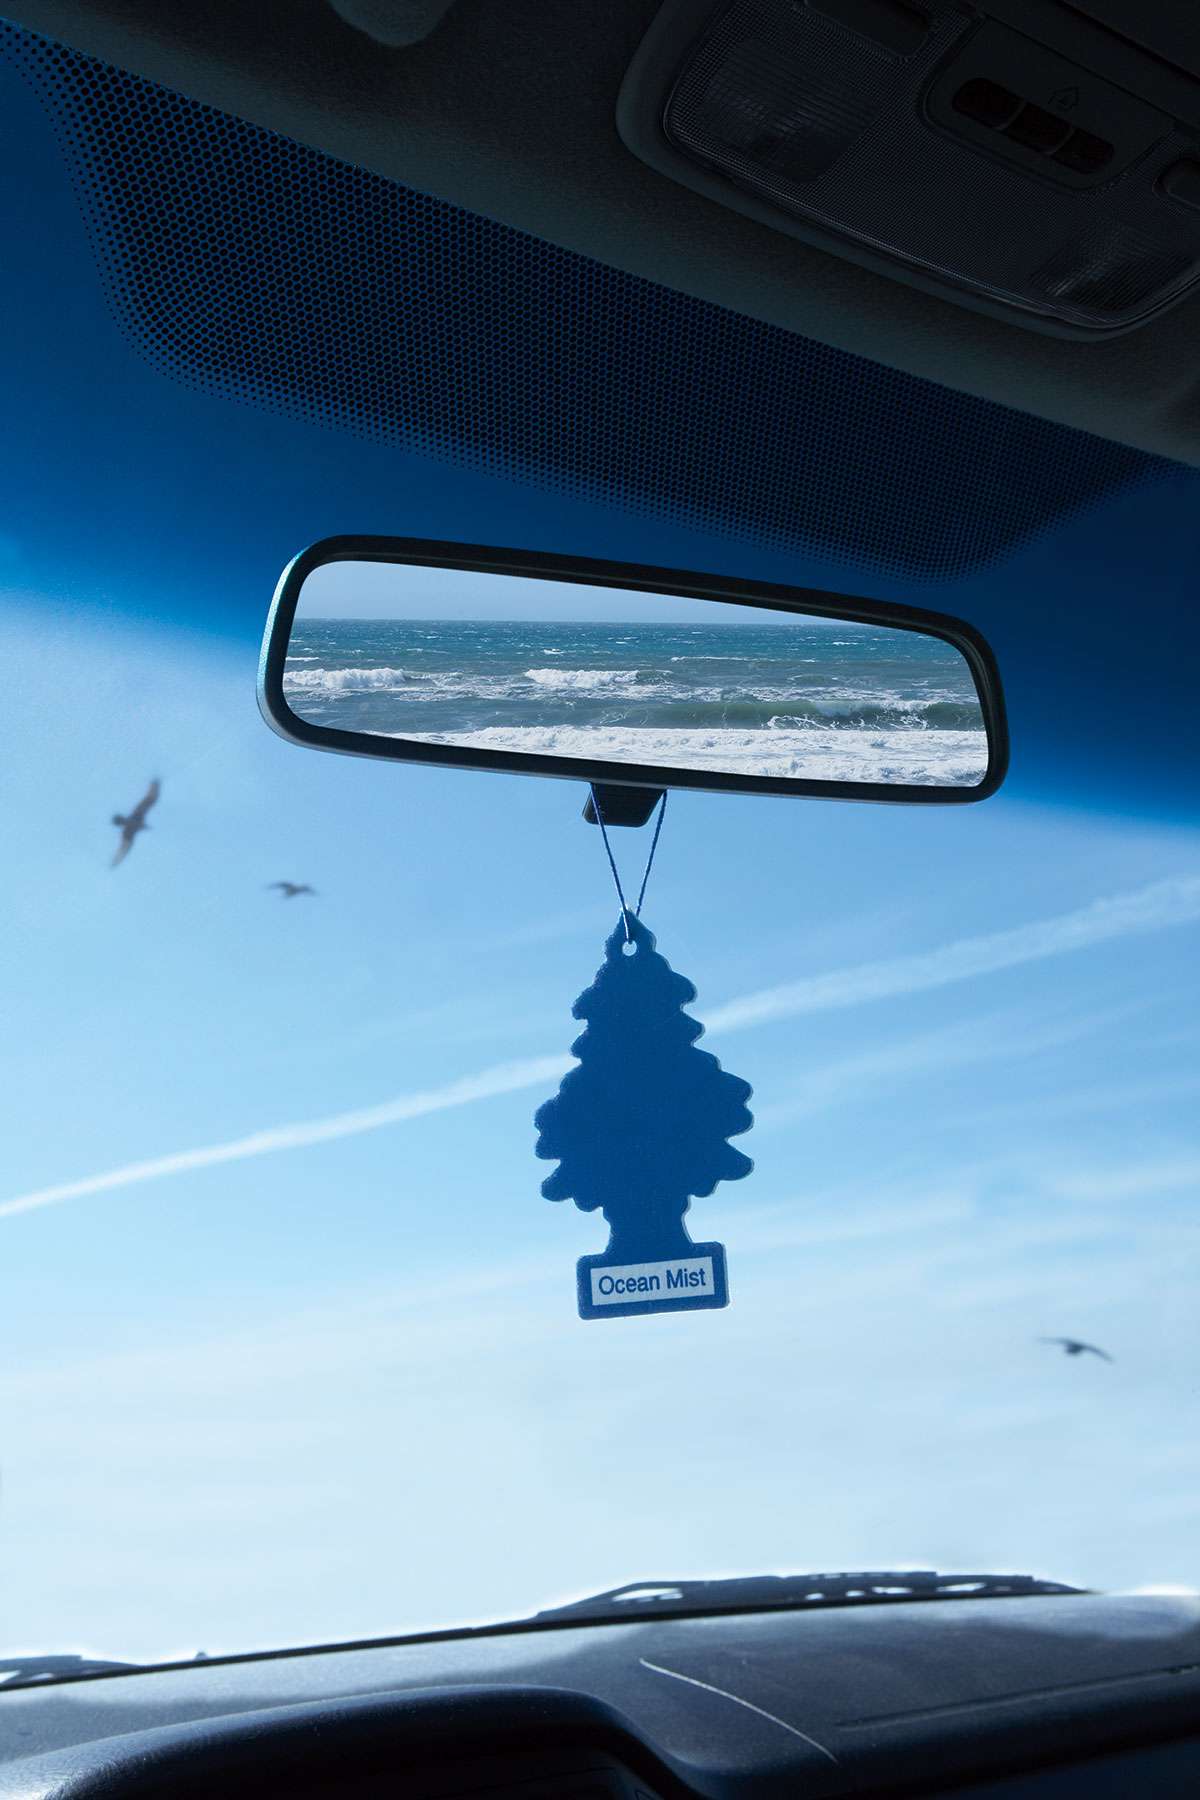 Air freshener hanging from a rear view mirror